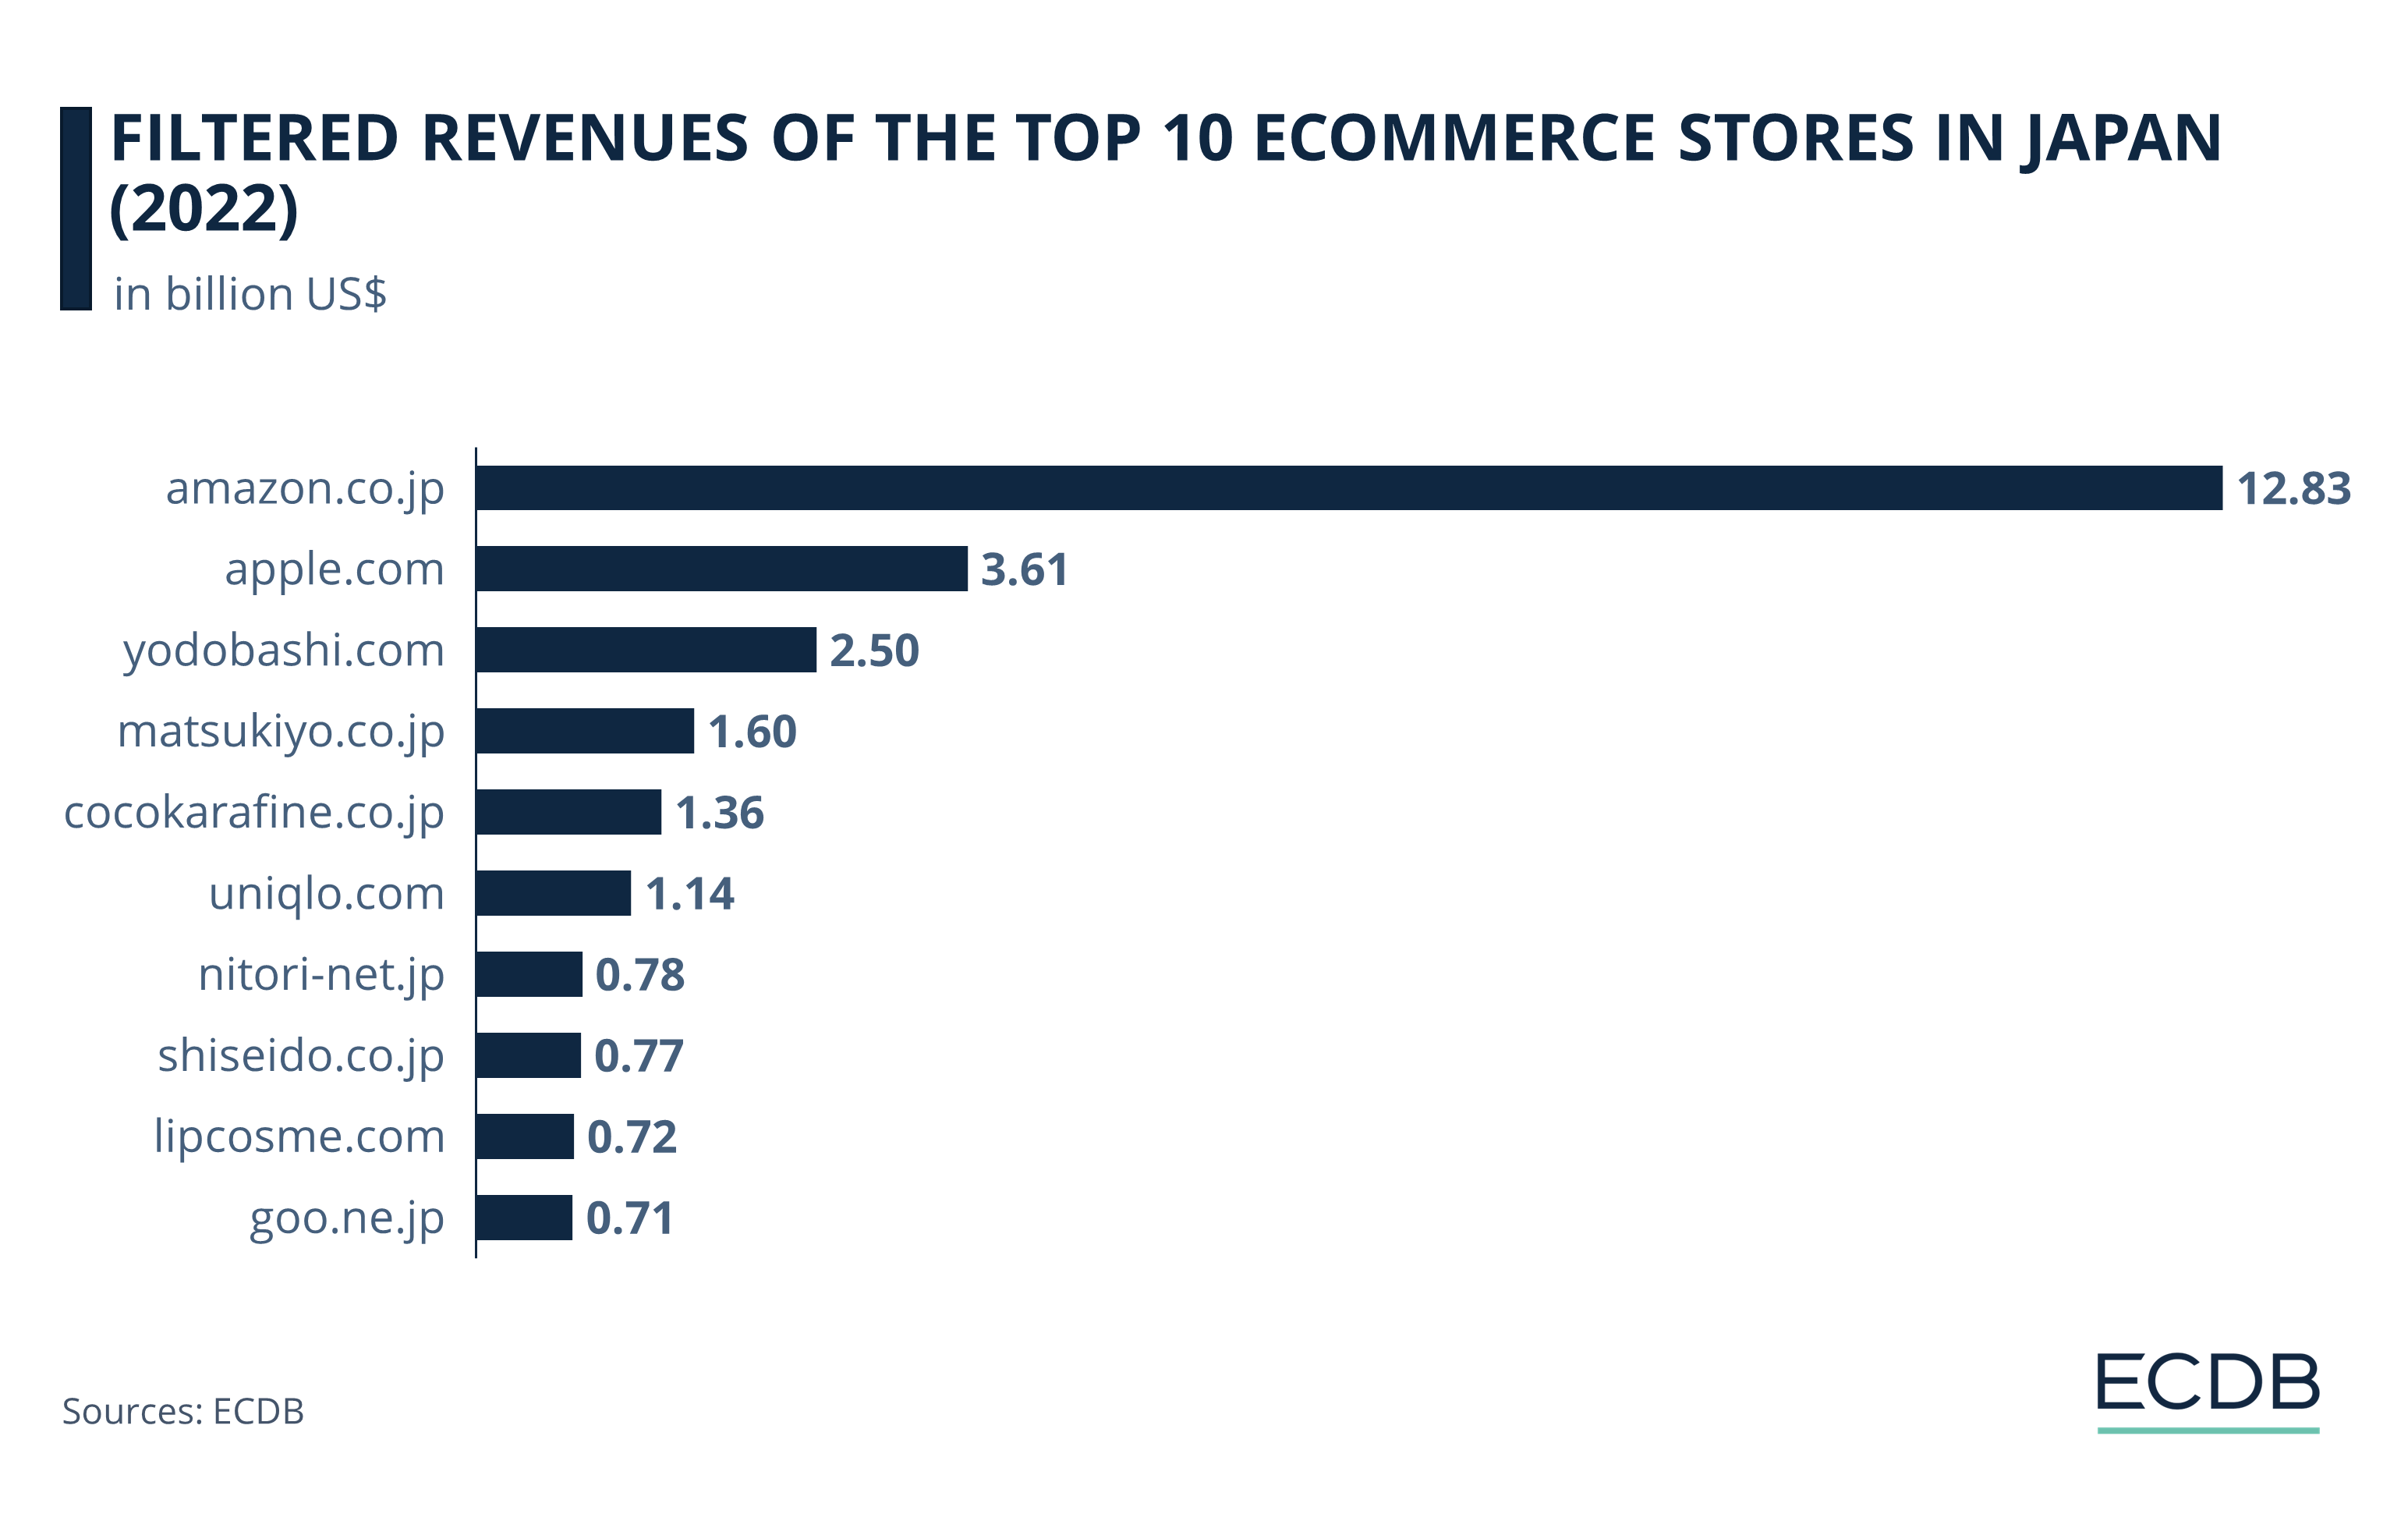 Filtered Revenues of the Top 10 eCommerce Stores in Japan (2022)